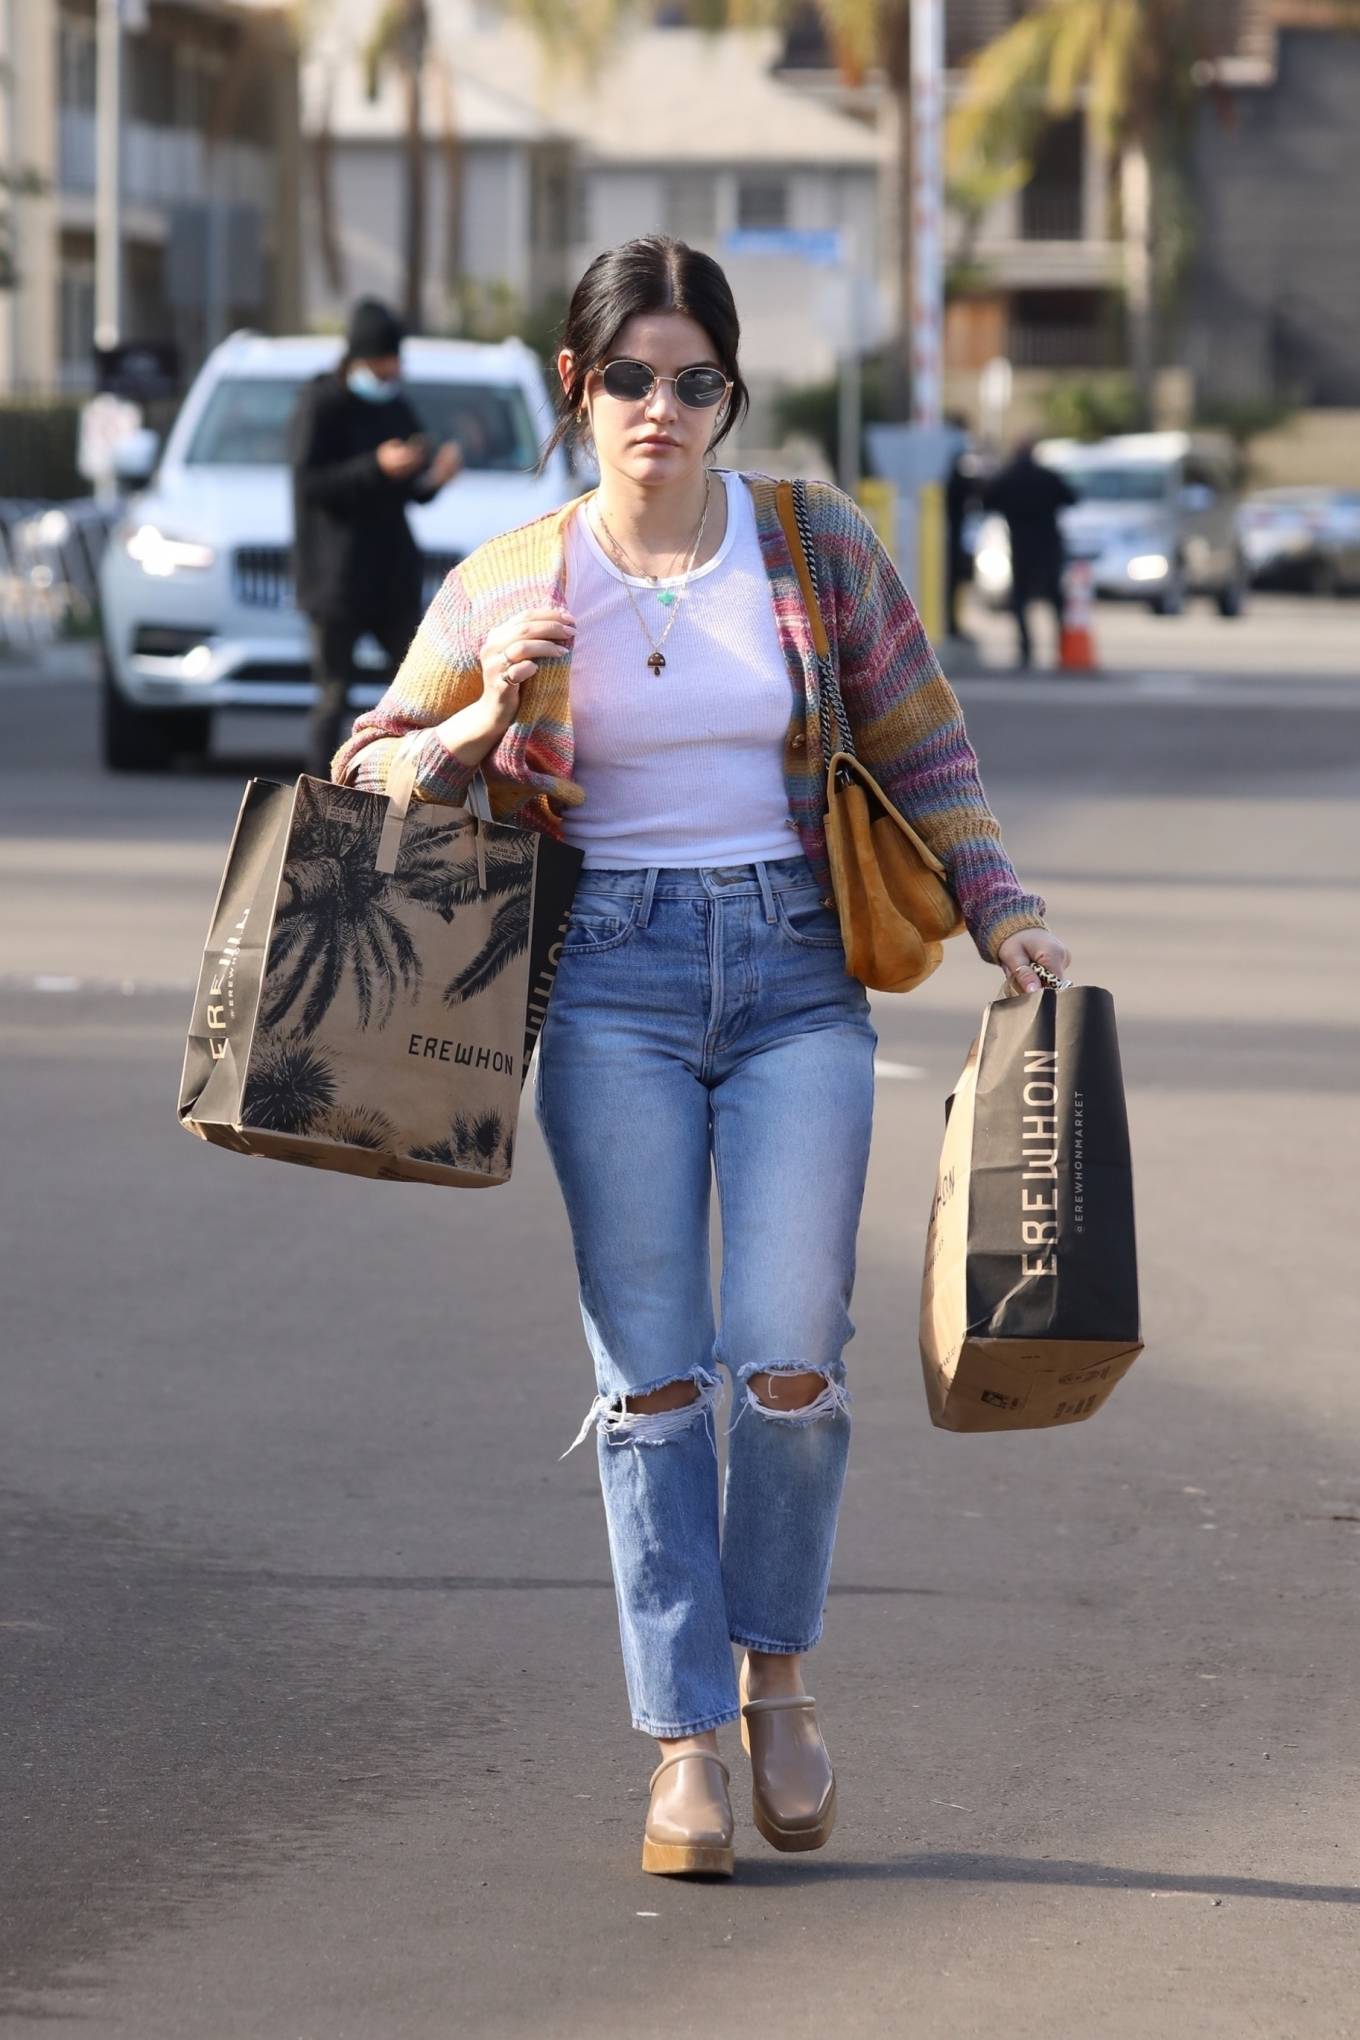 Lucy Hale 2021 : Lucy Hale – Grocery run to Erewhon Organic Grocers in Los Angeles-05